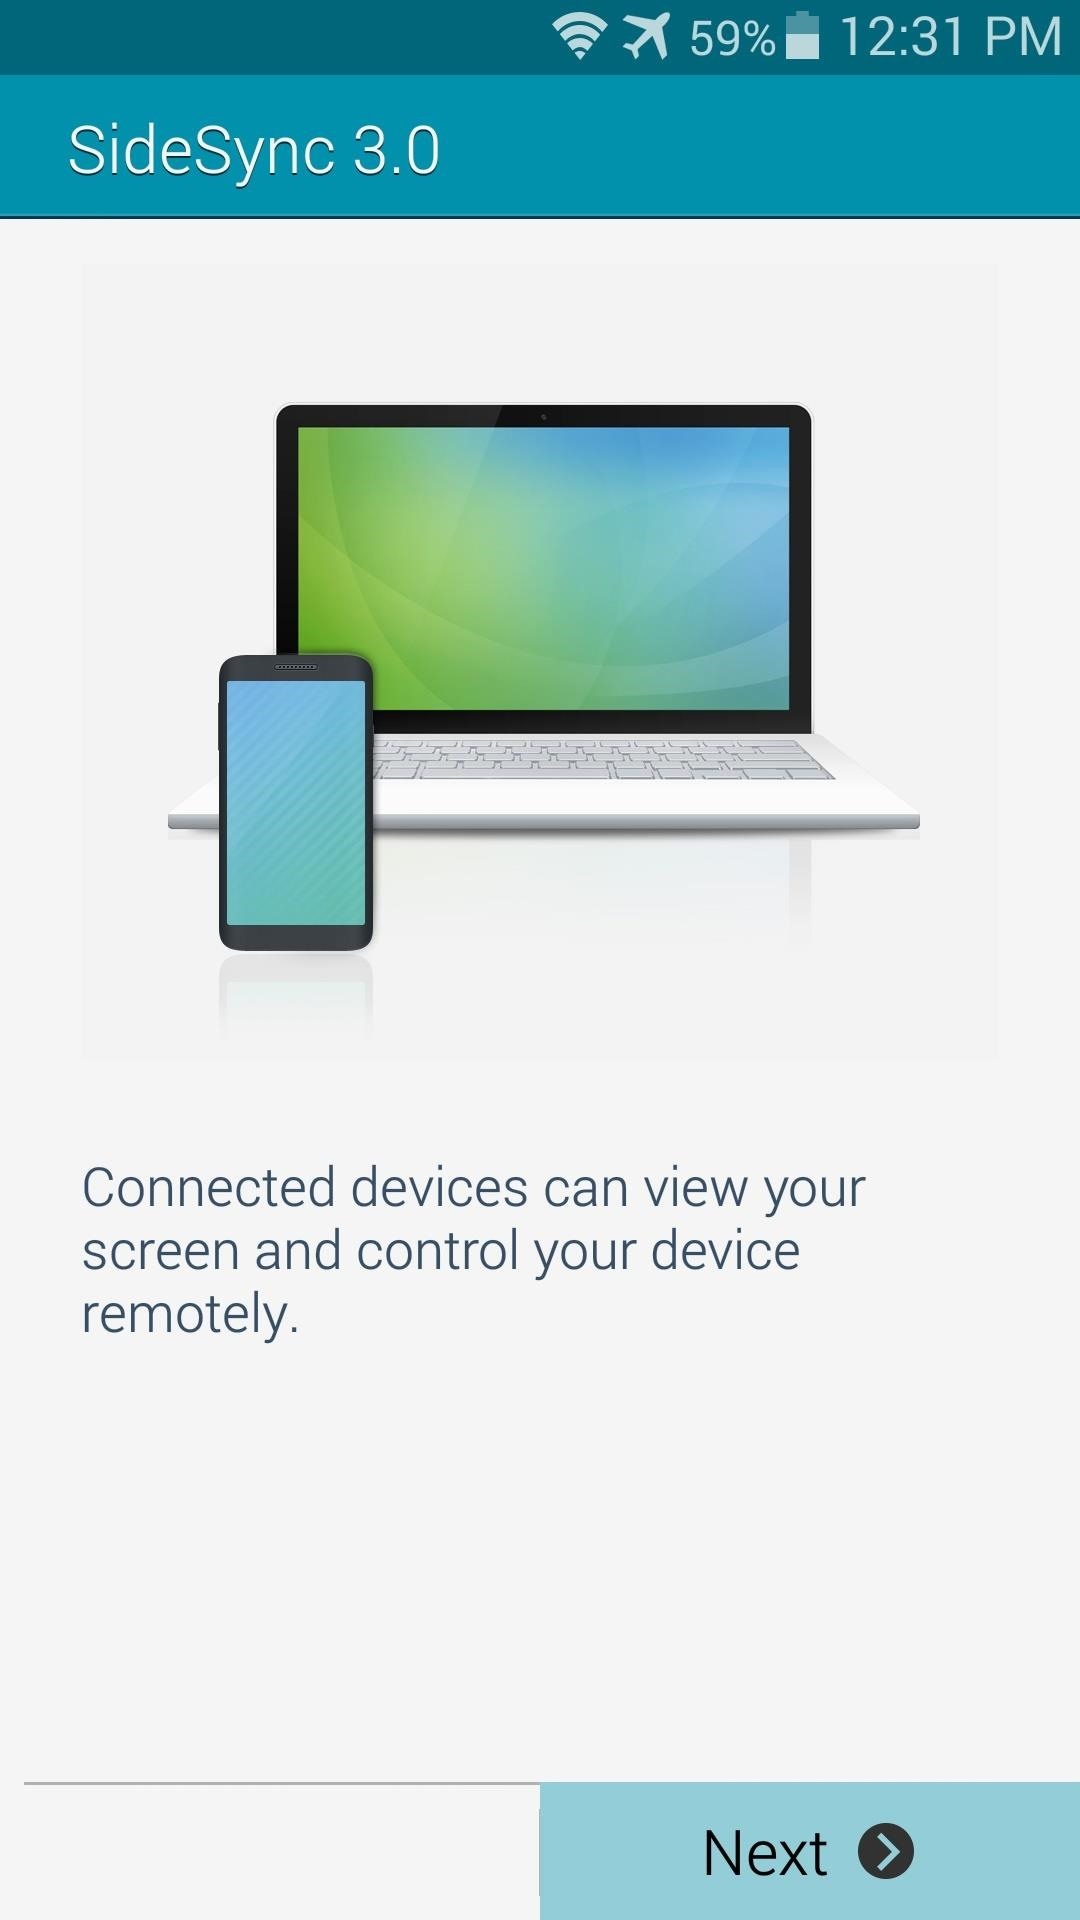 How to Control Your Samsung Galaxy Device from a Mac or Windows Computer